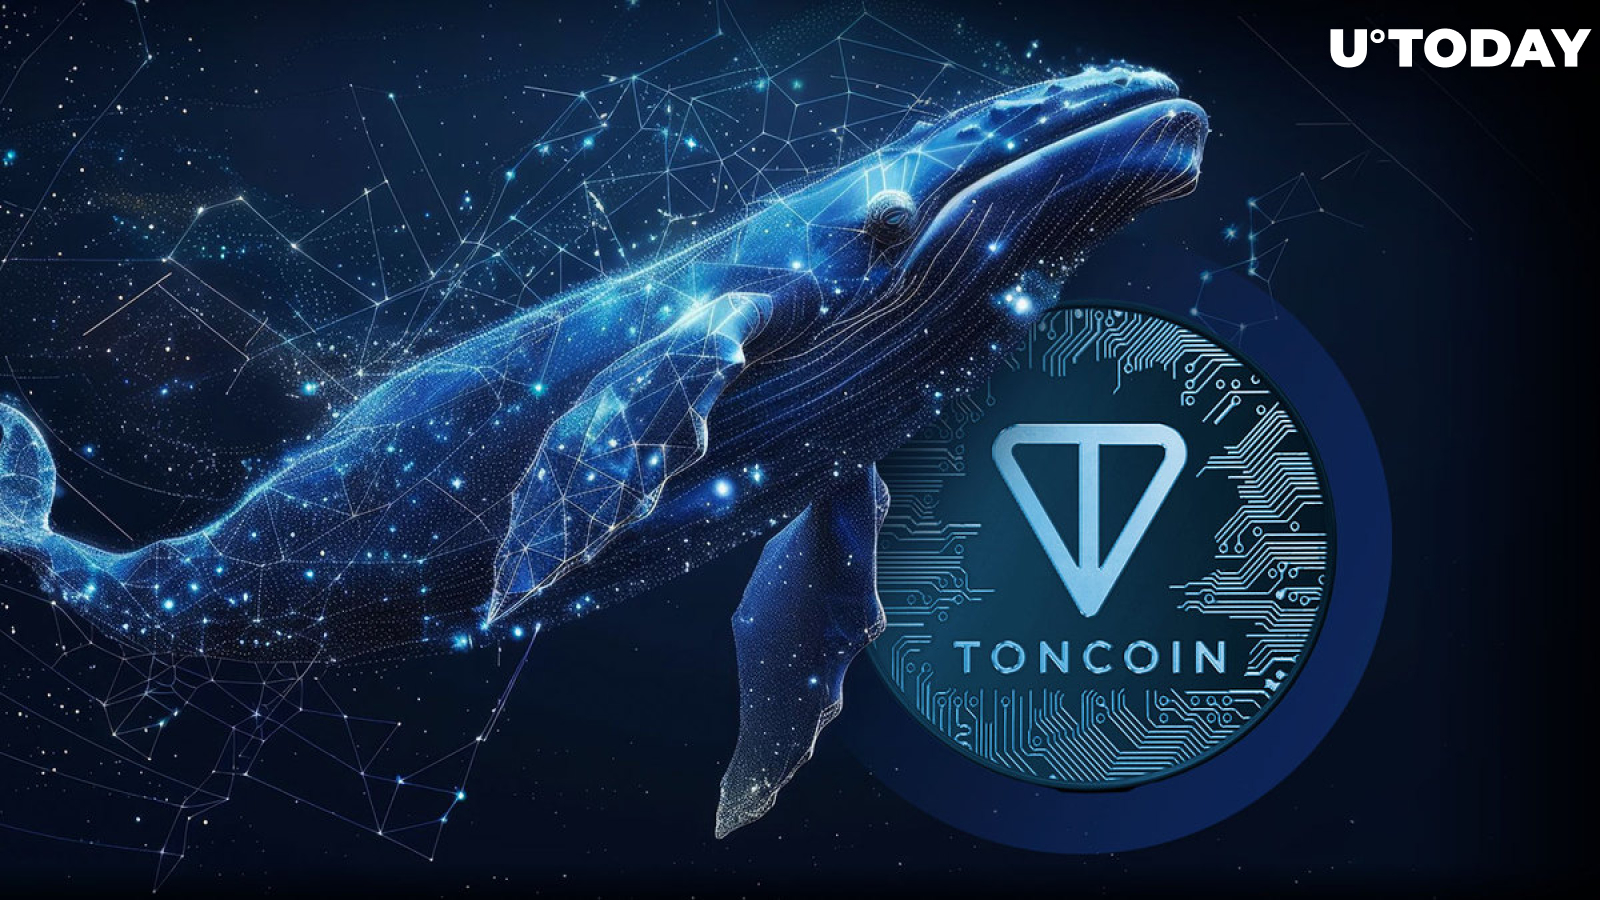 Toncoin (TON) Whales' Fiesta Continues, With 1.72 Million in Volume